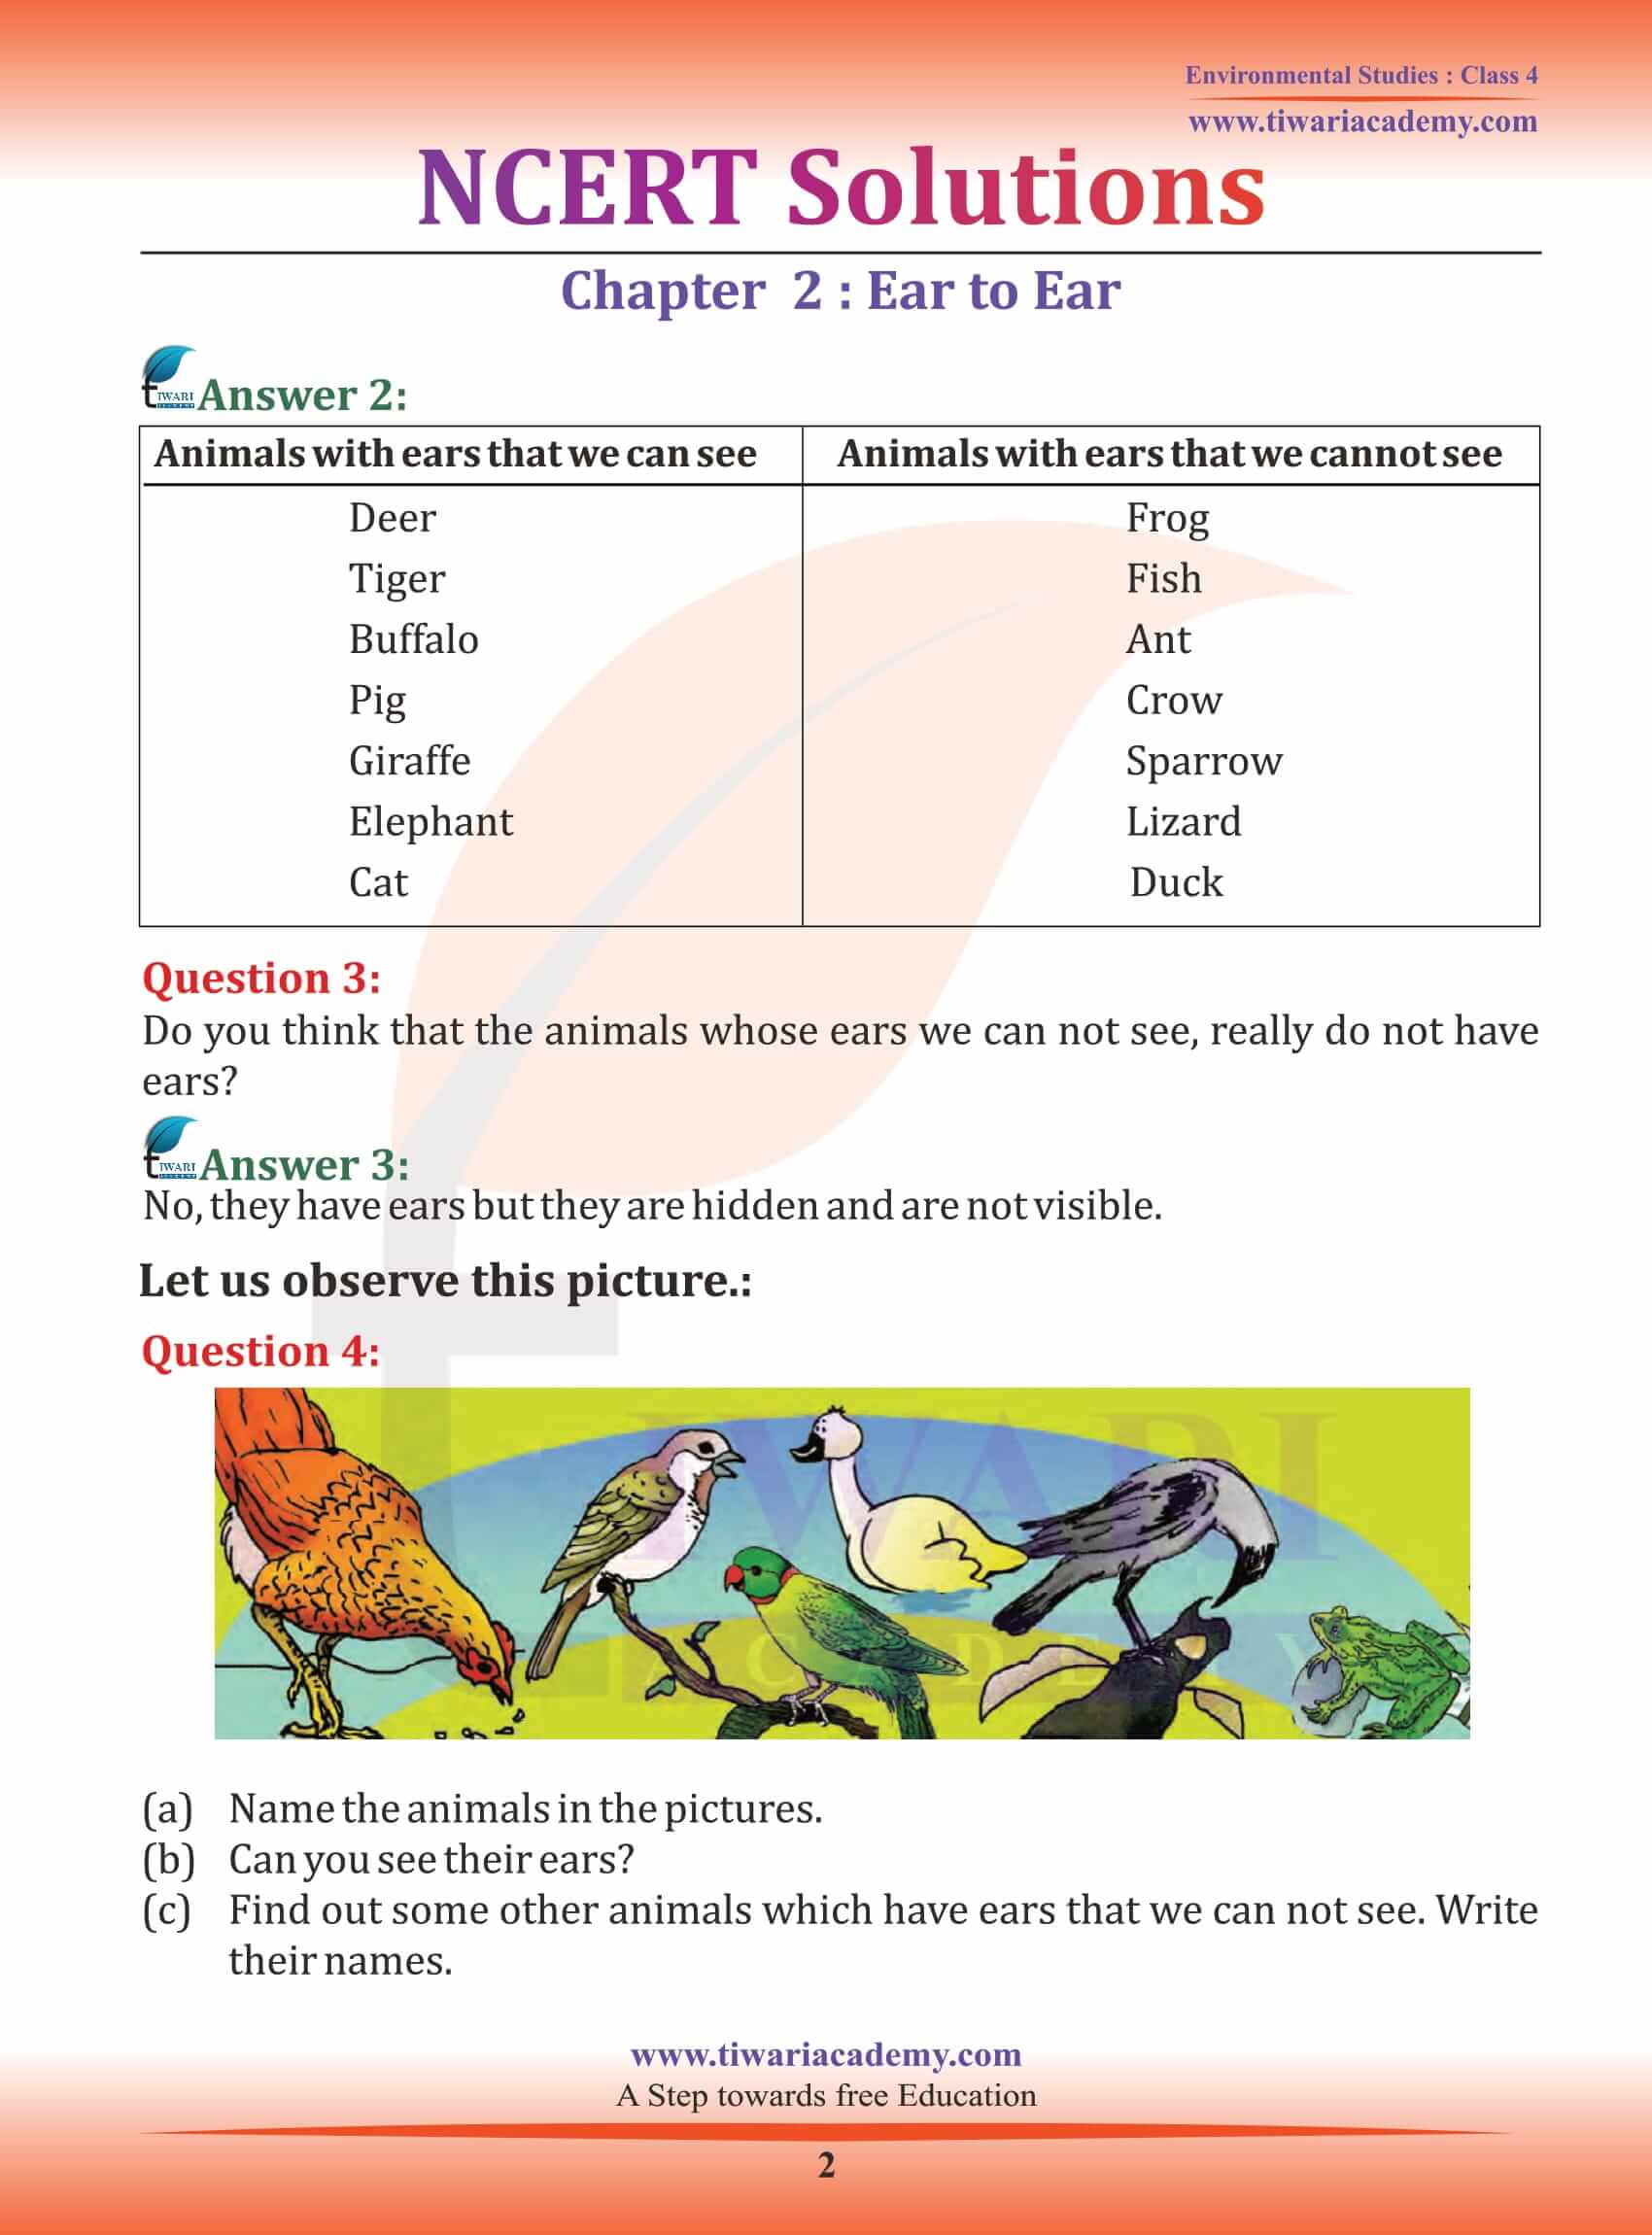 NCERT Solutions for Class 4 EVS in Hindi and English Medium